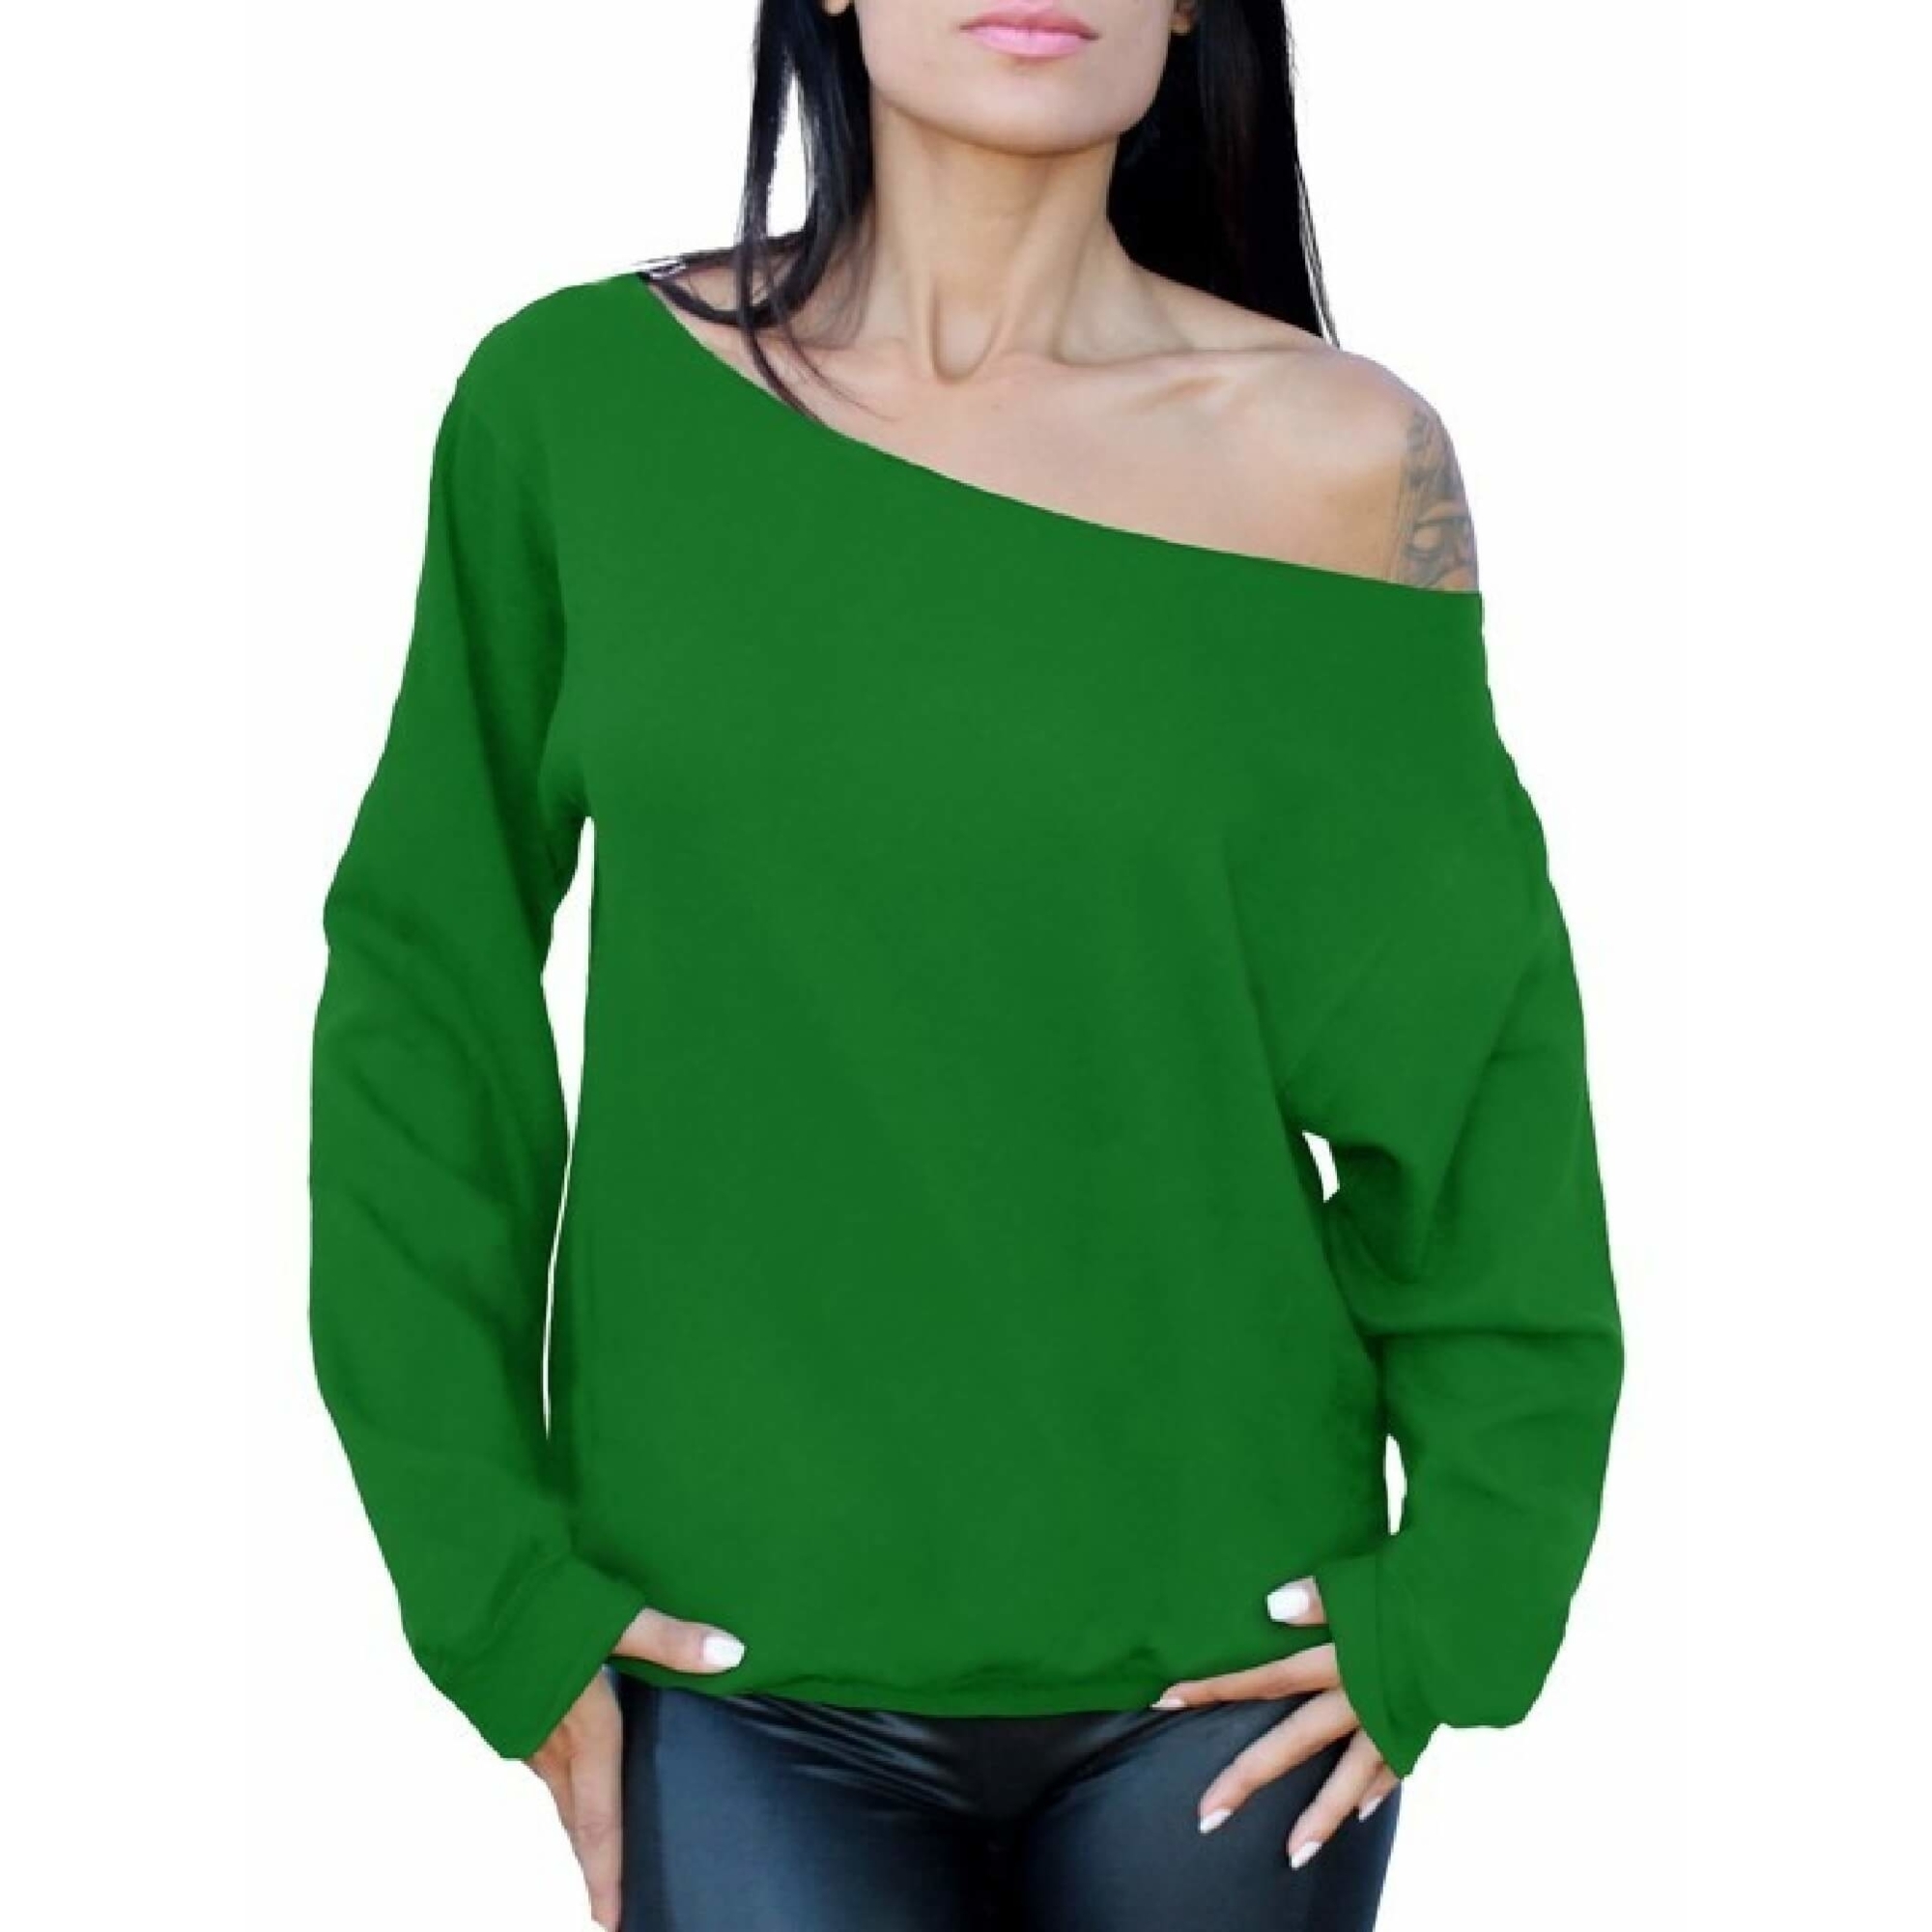 Awkward Styles Women's Off the Shoulder Slouchy Oversized Sweatshirt Sexy Off the Shoulder Sweater Pullover Off Shoulder Tops